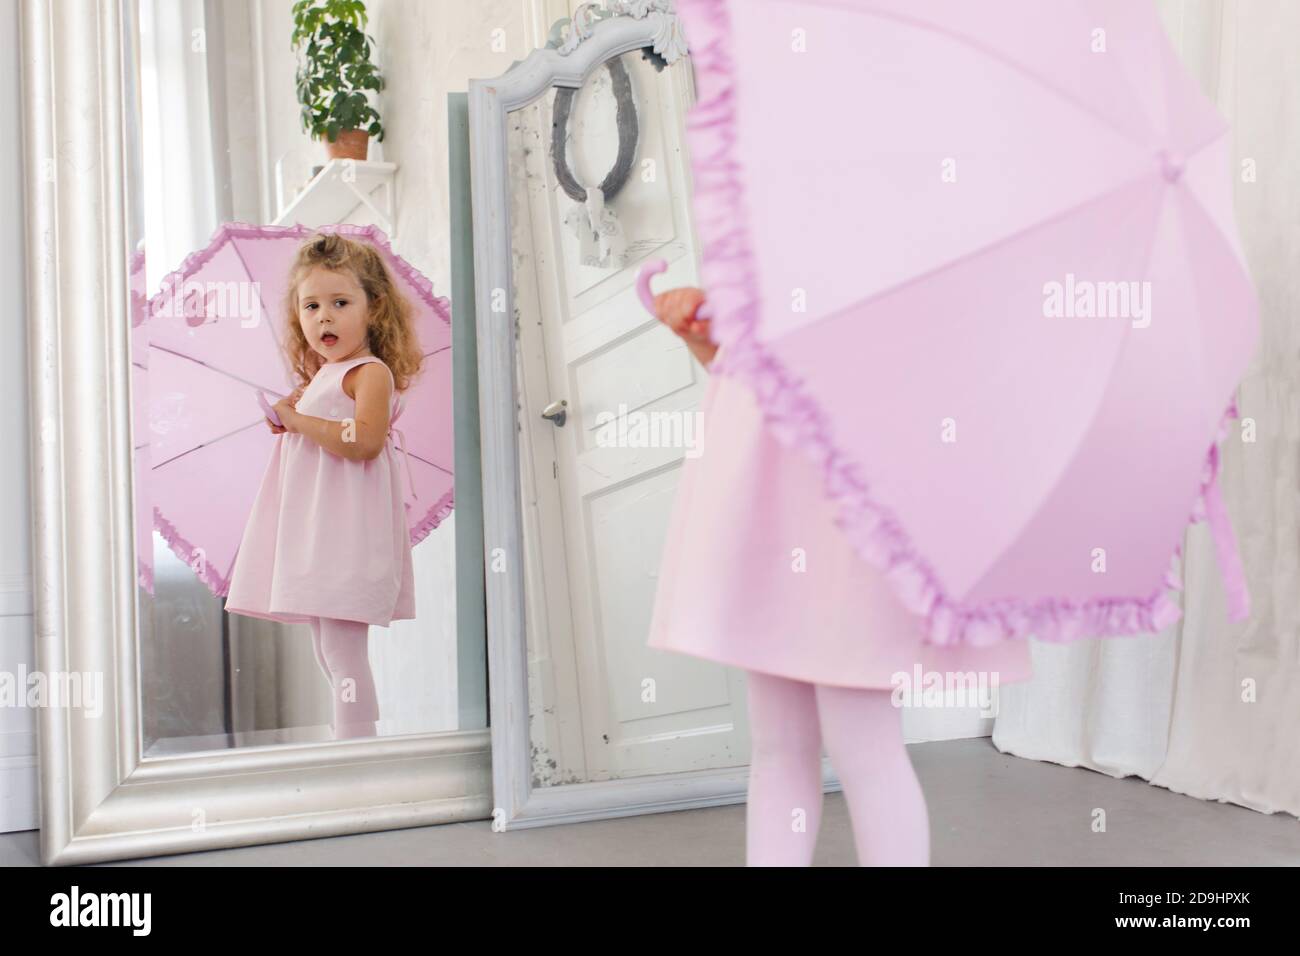 Cute girl in front of mirror at home Stock Photo